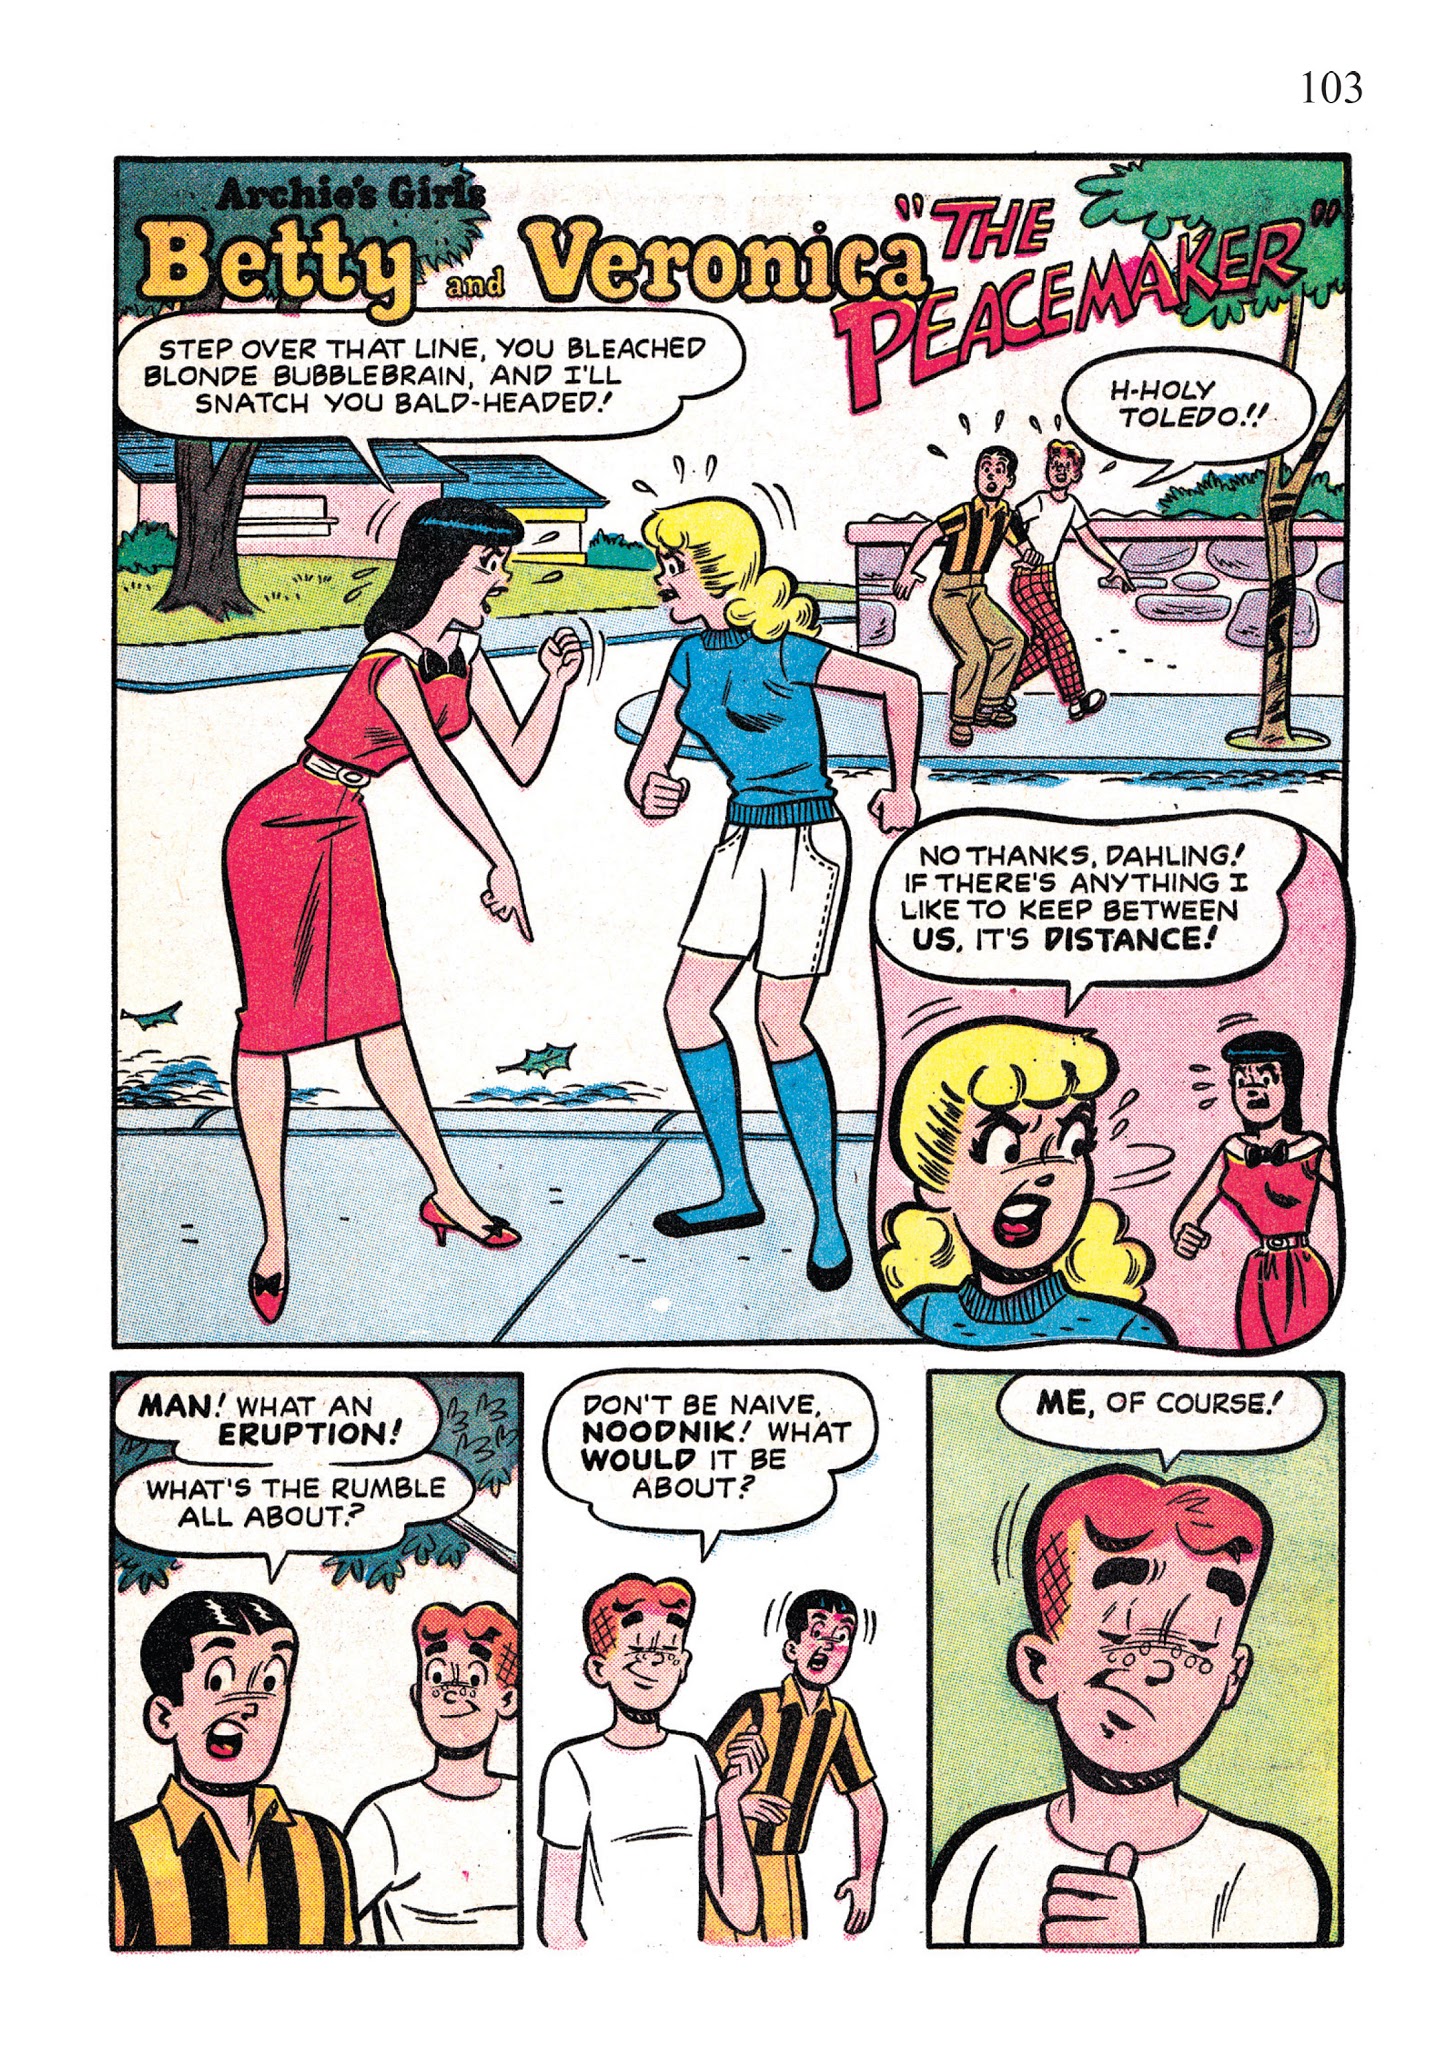 Read online The Best of Archie Comics: Betty & Veronica comic -  Issue # TPB - 104